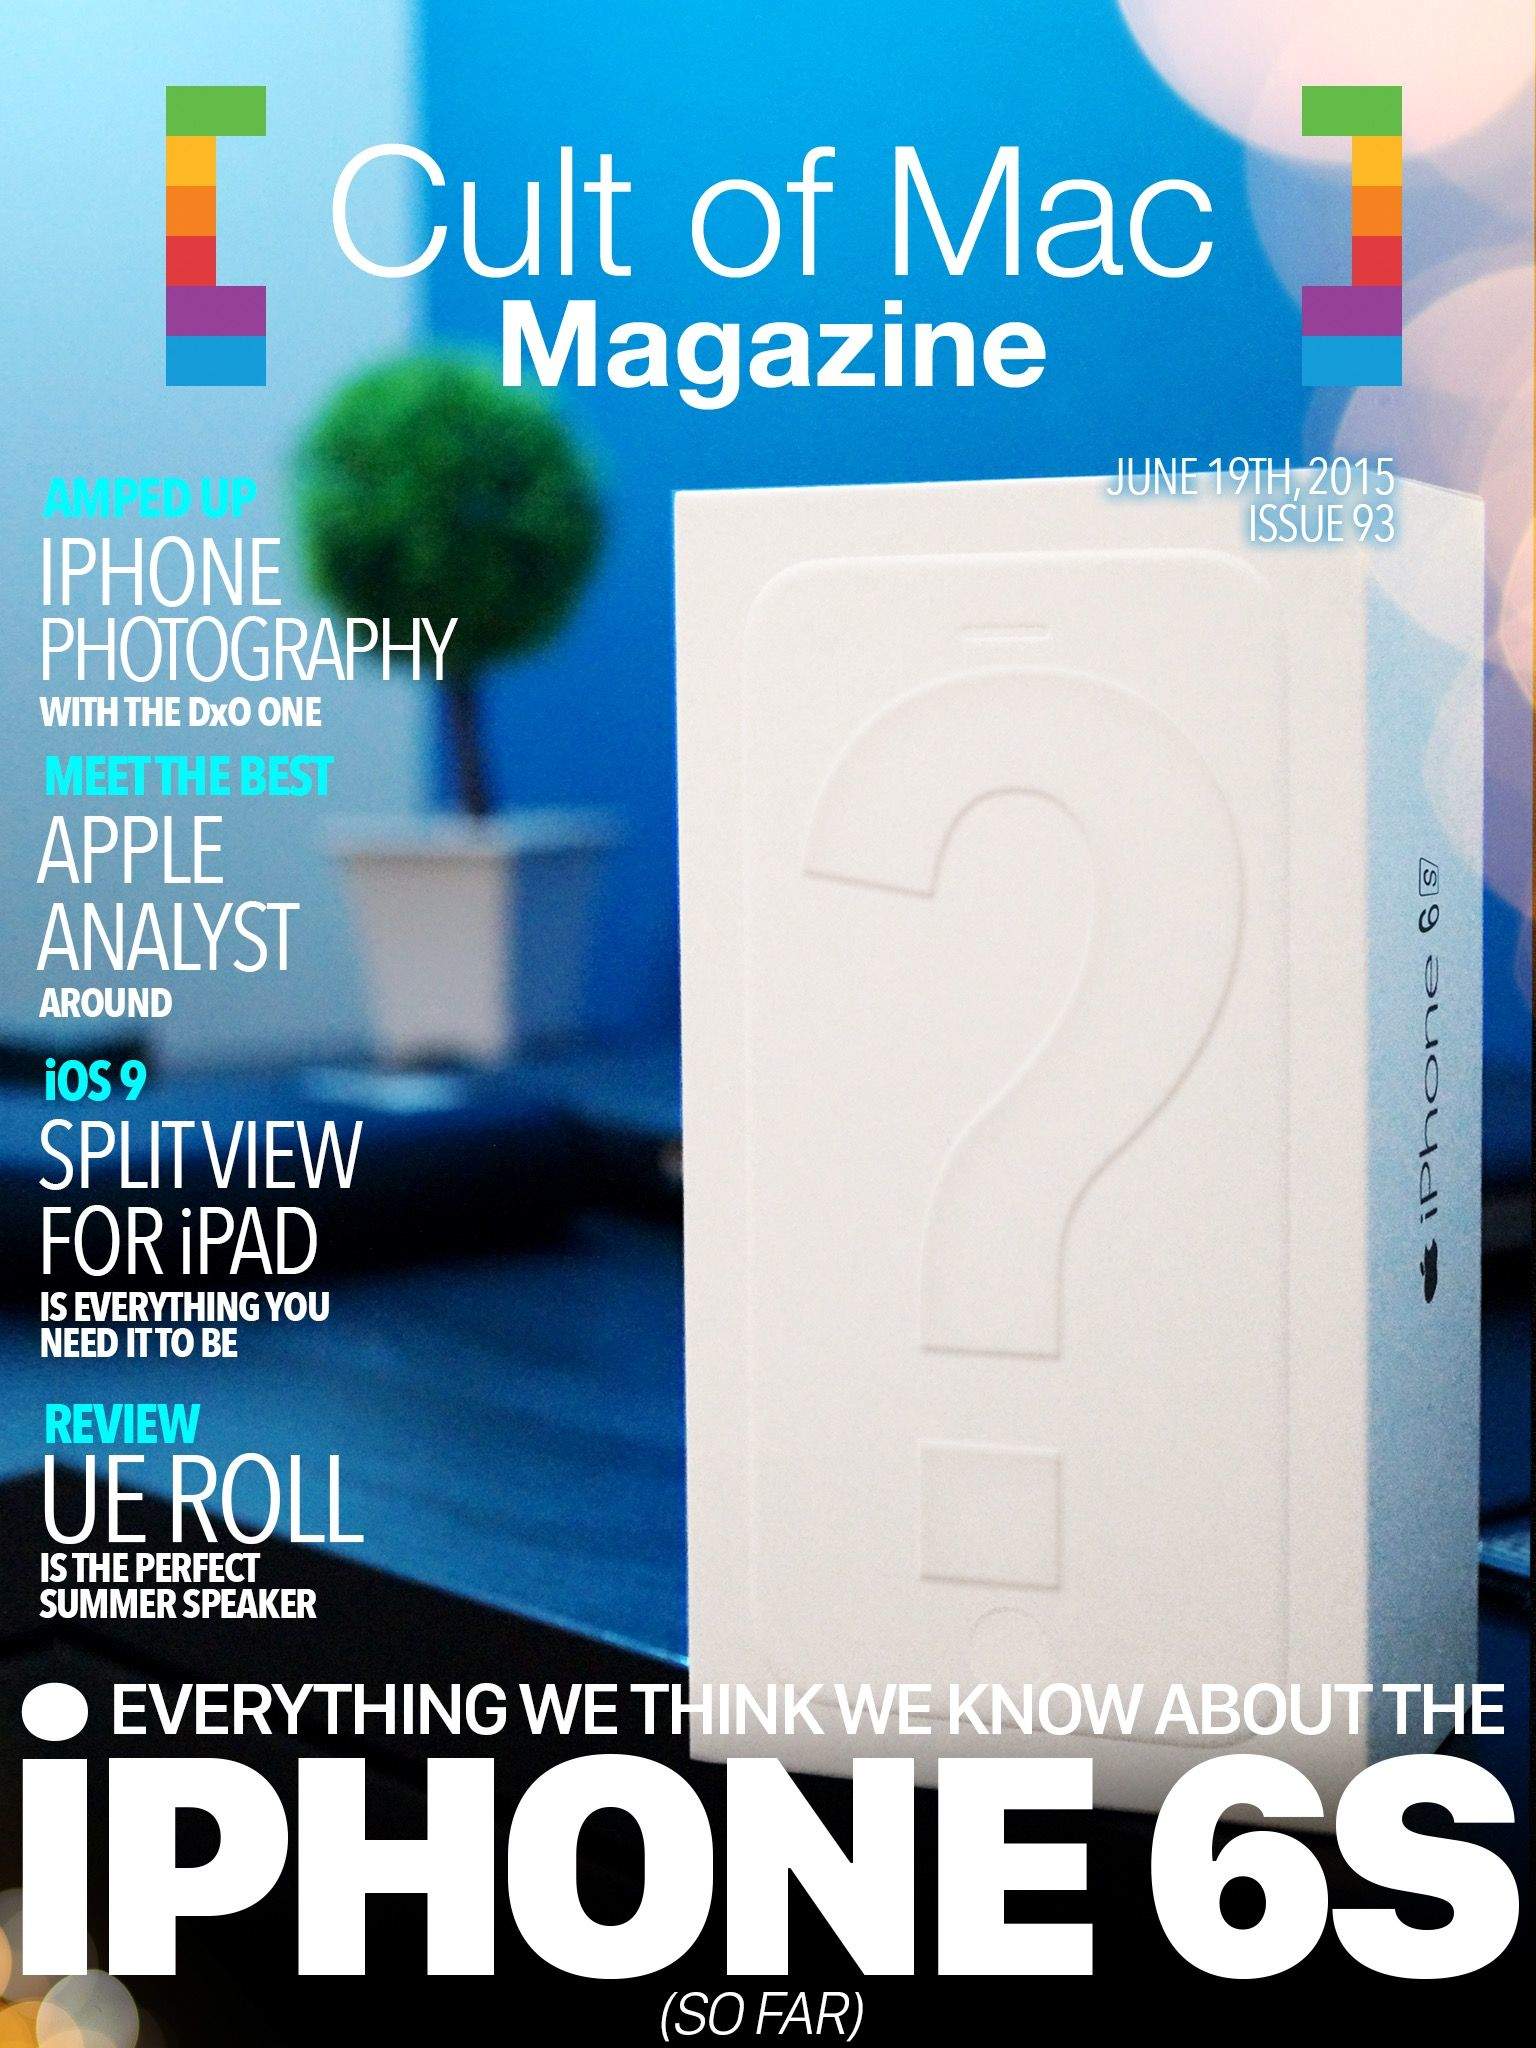 Catching up on all things Apple? Check out this week's Cult of Mac Magazine.